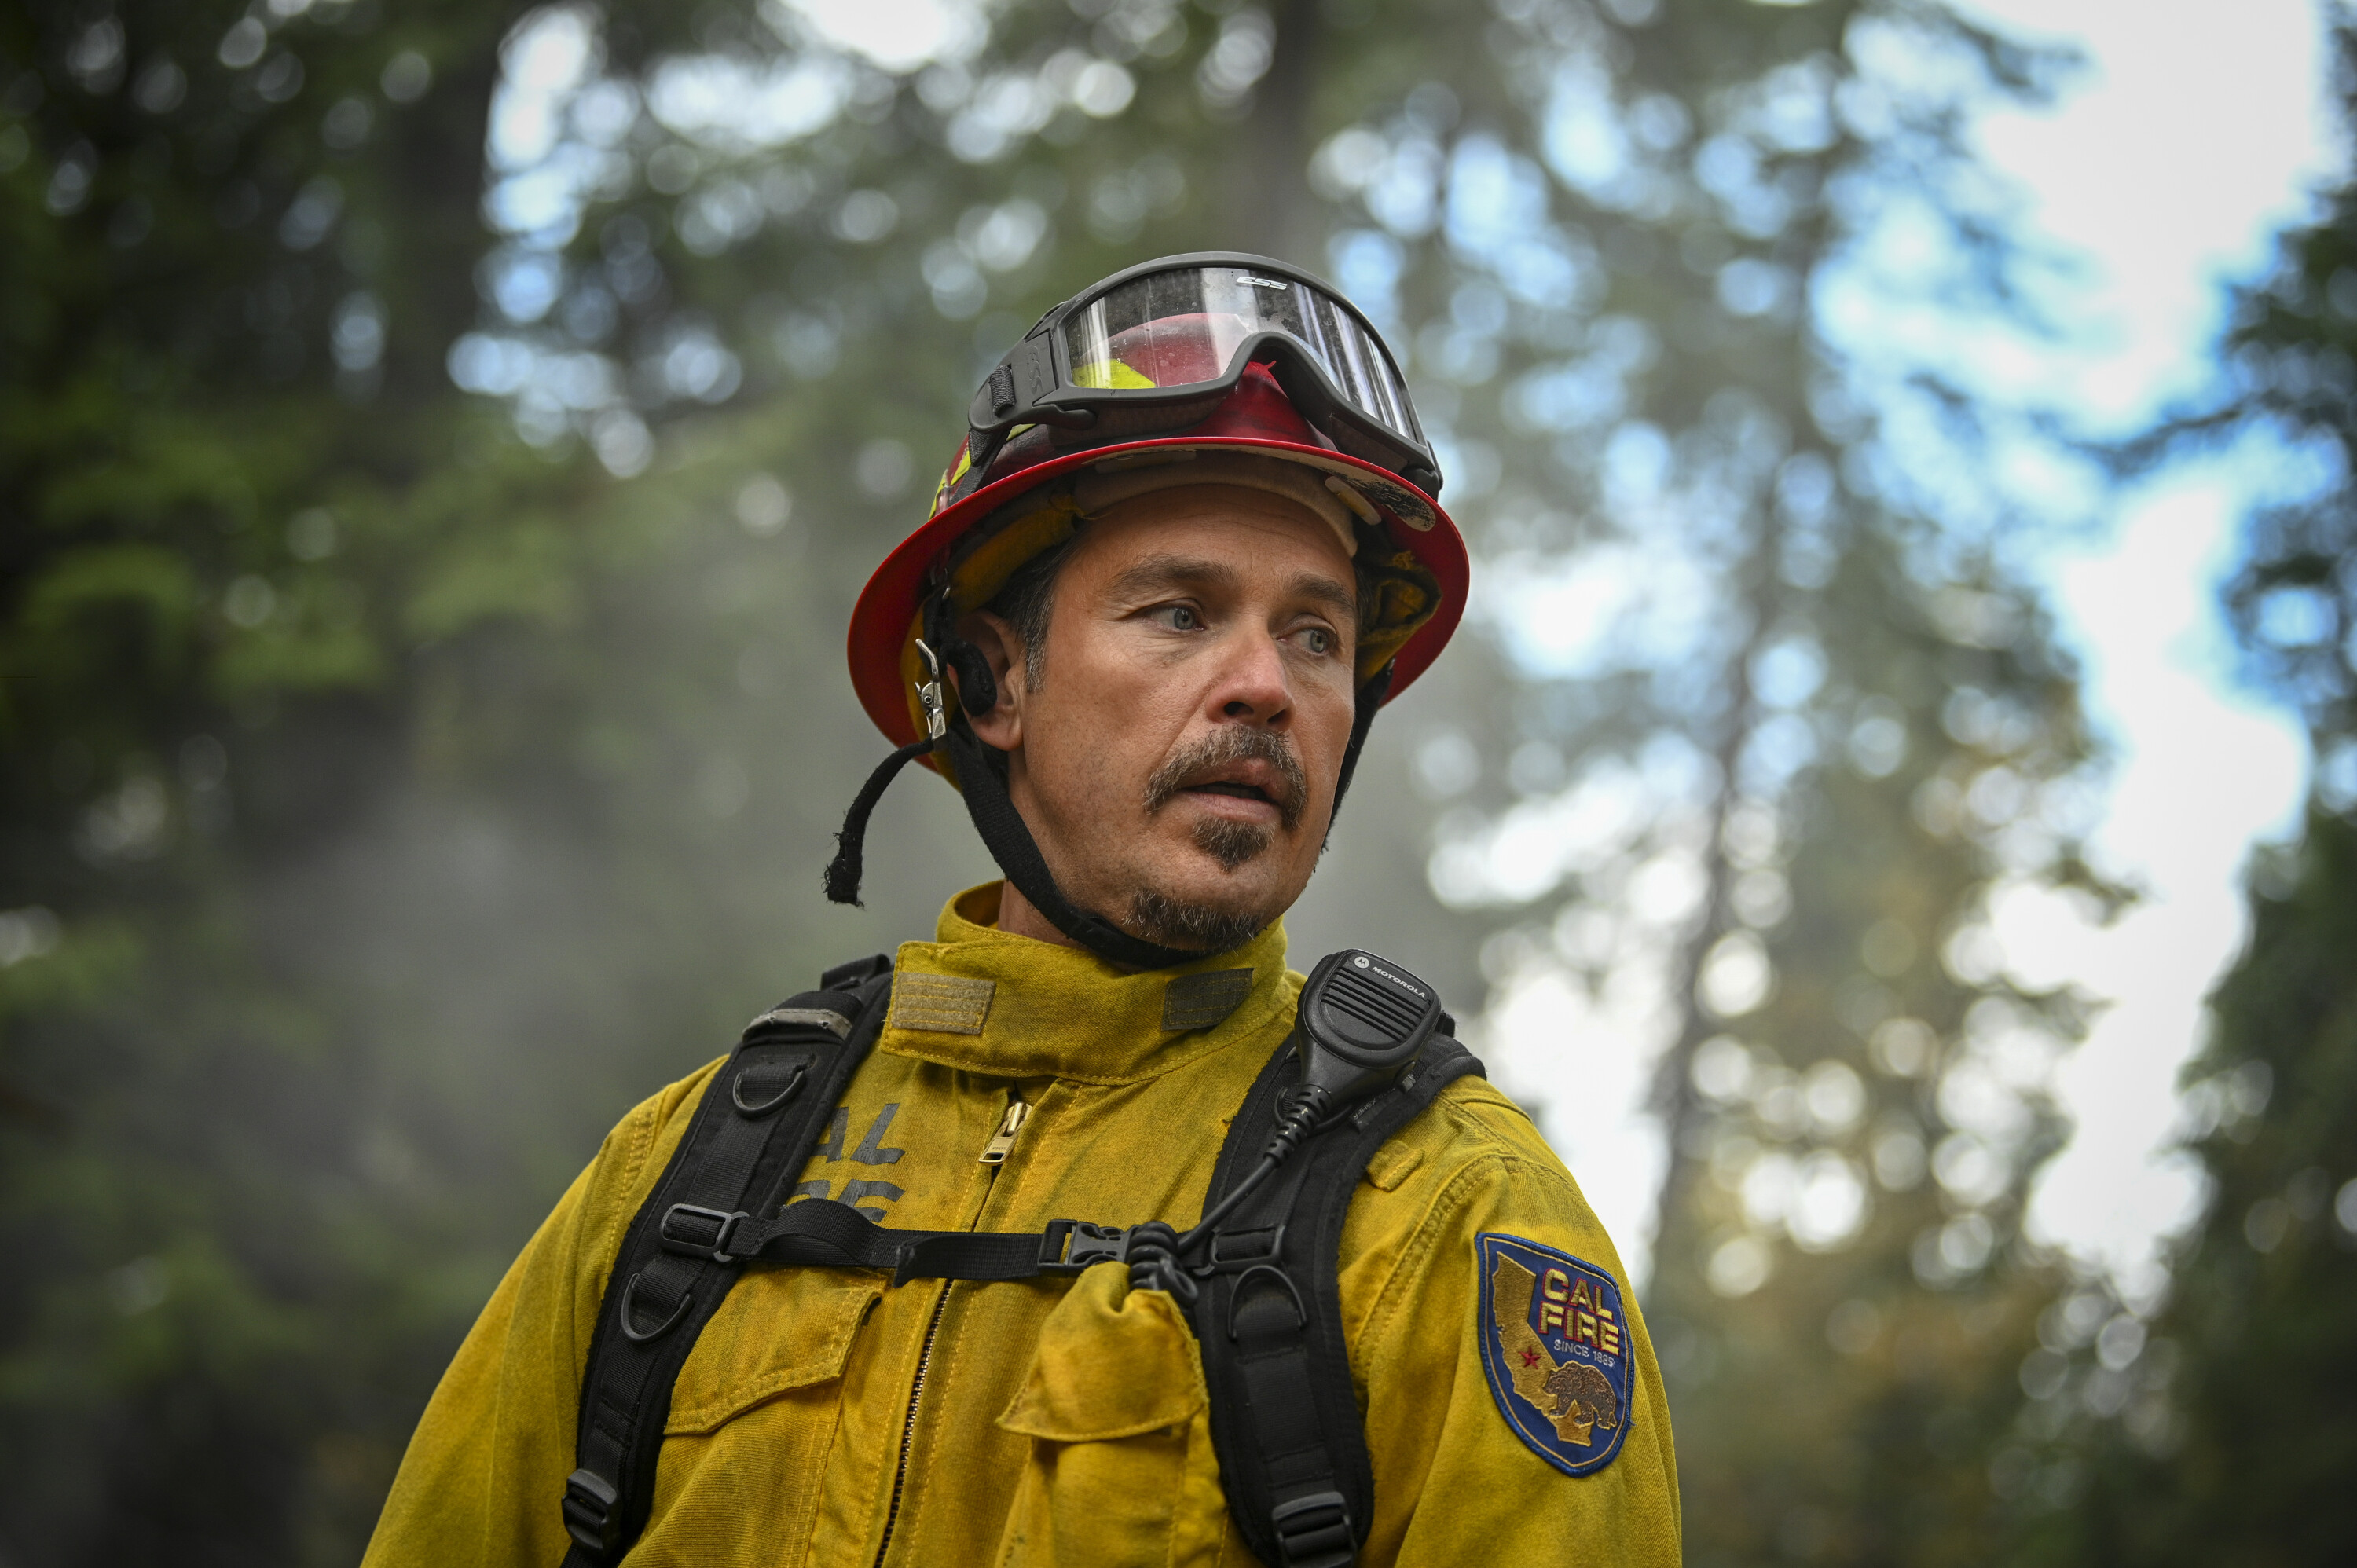 Actor dressed as a firefighter in the CBS drama 'Fire Country'